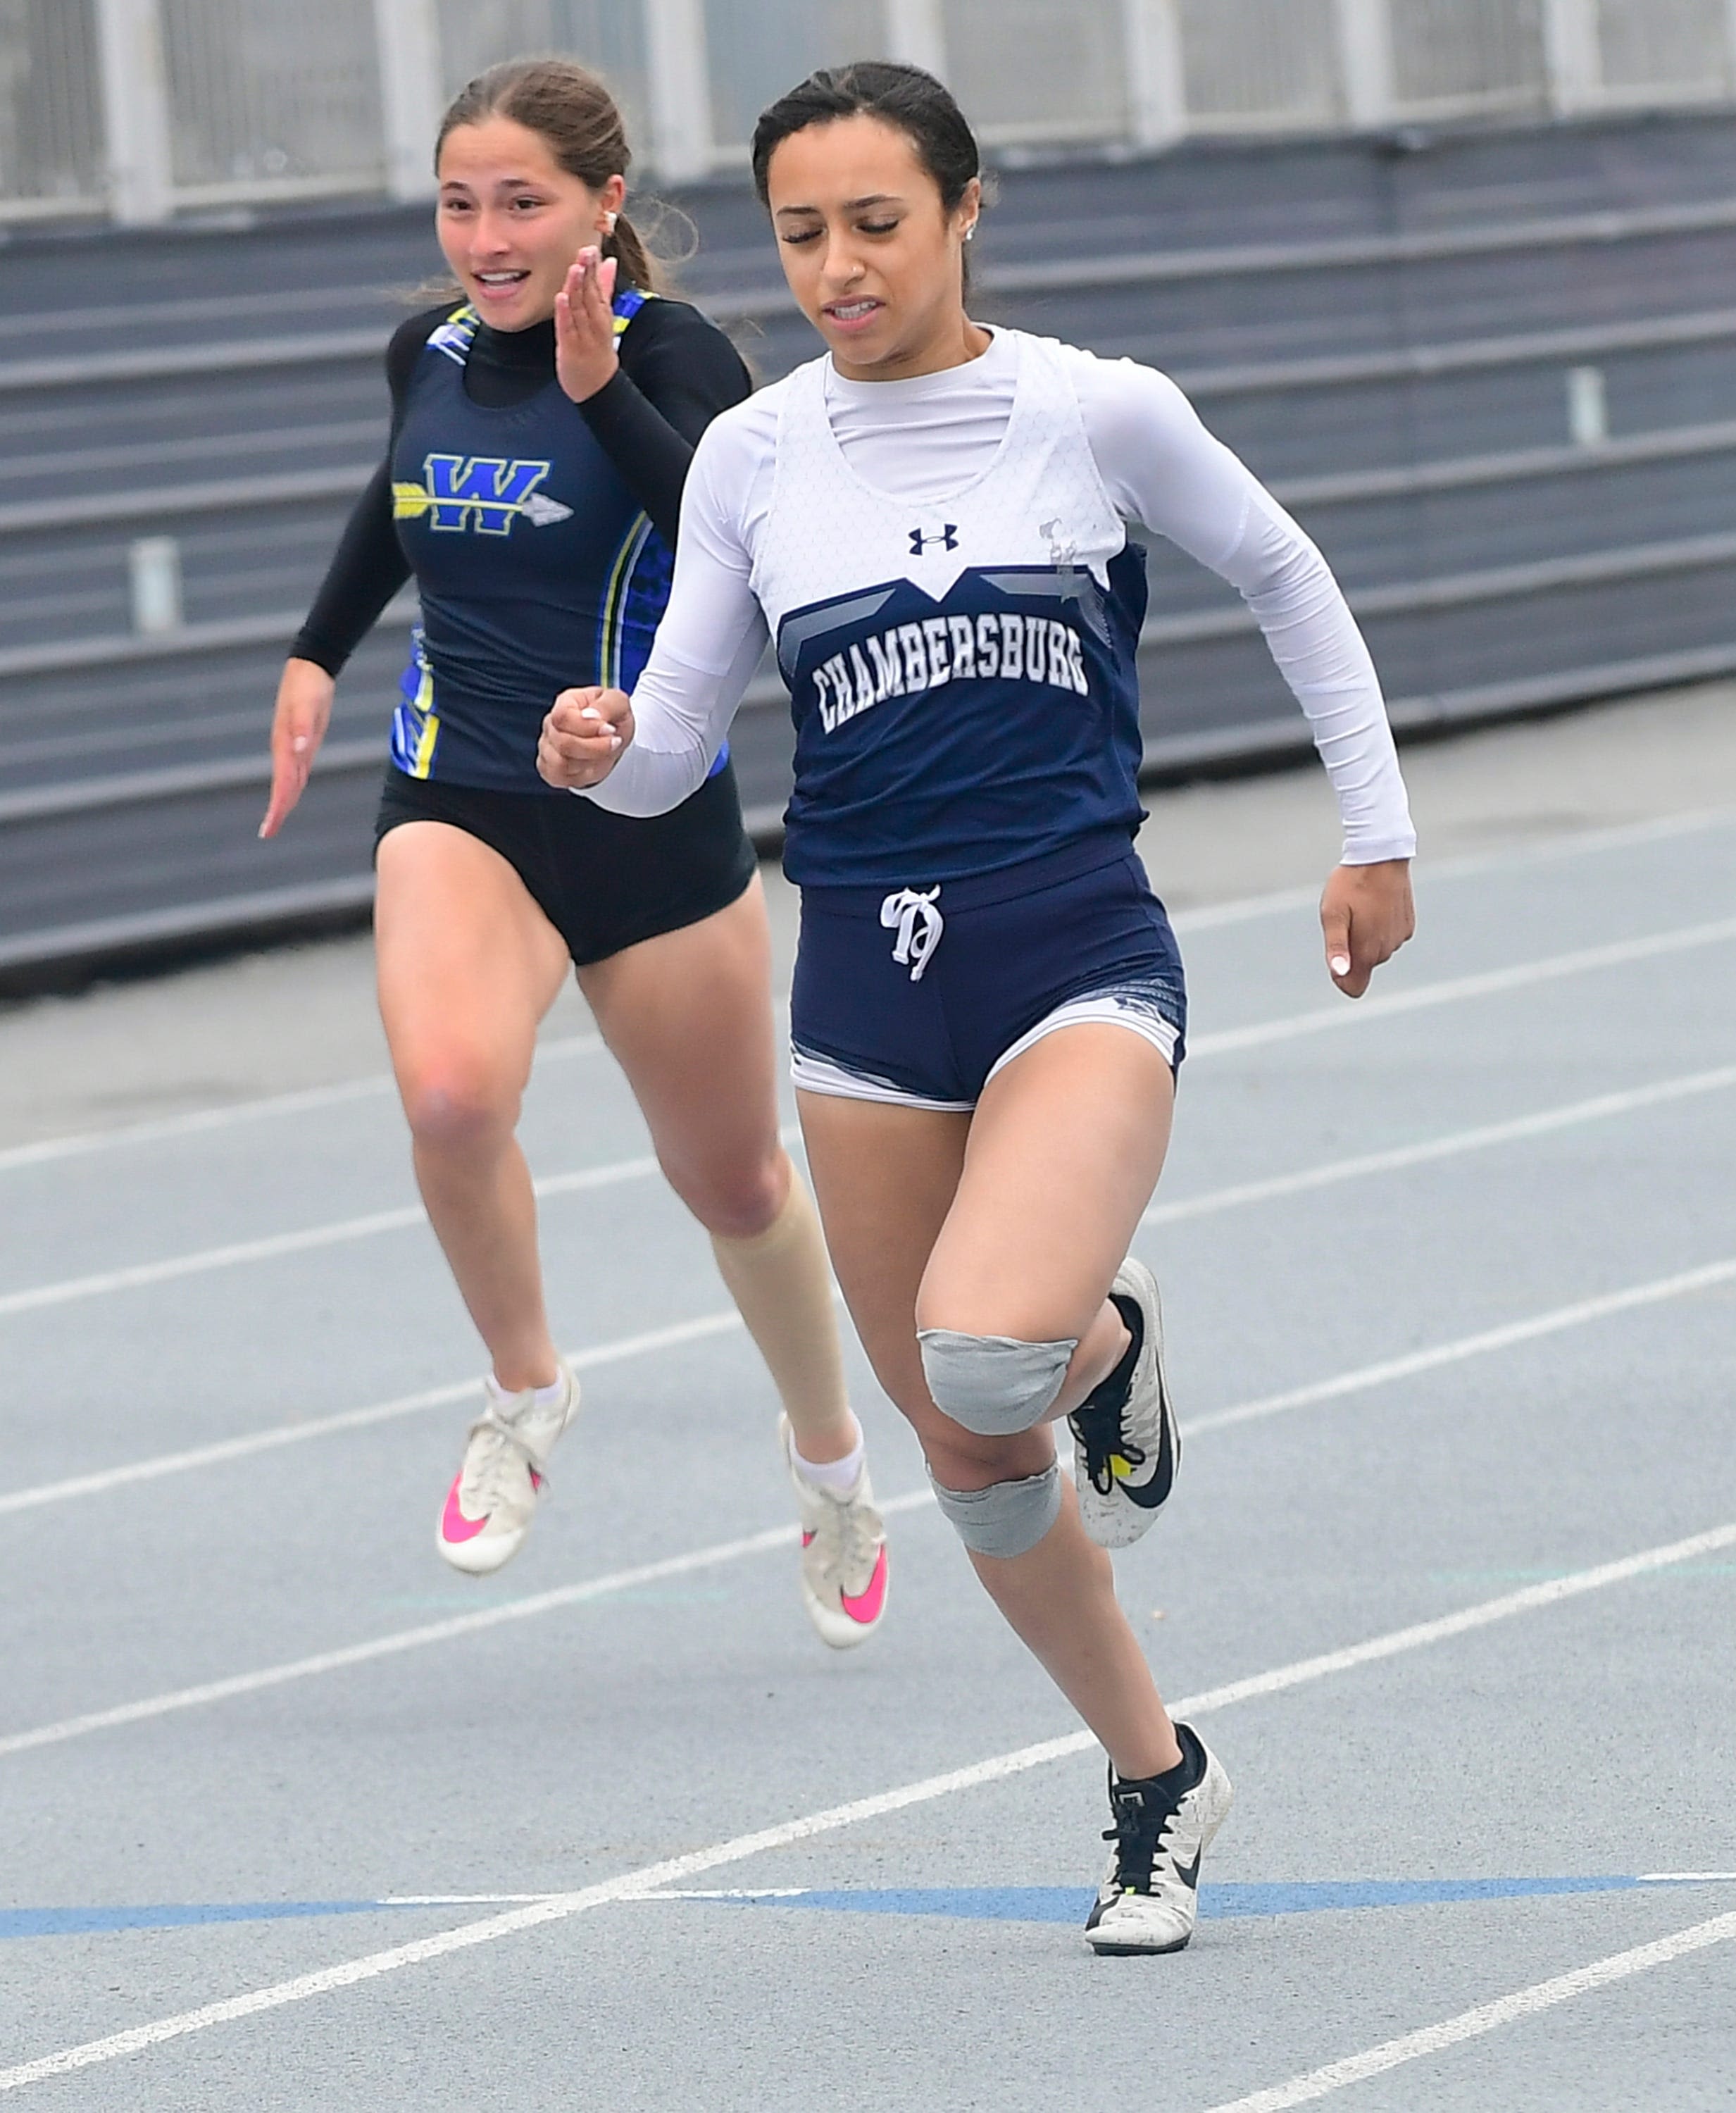 Mid-Penn track and field: How Franklin County athletes fared at the championship meet